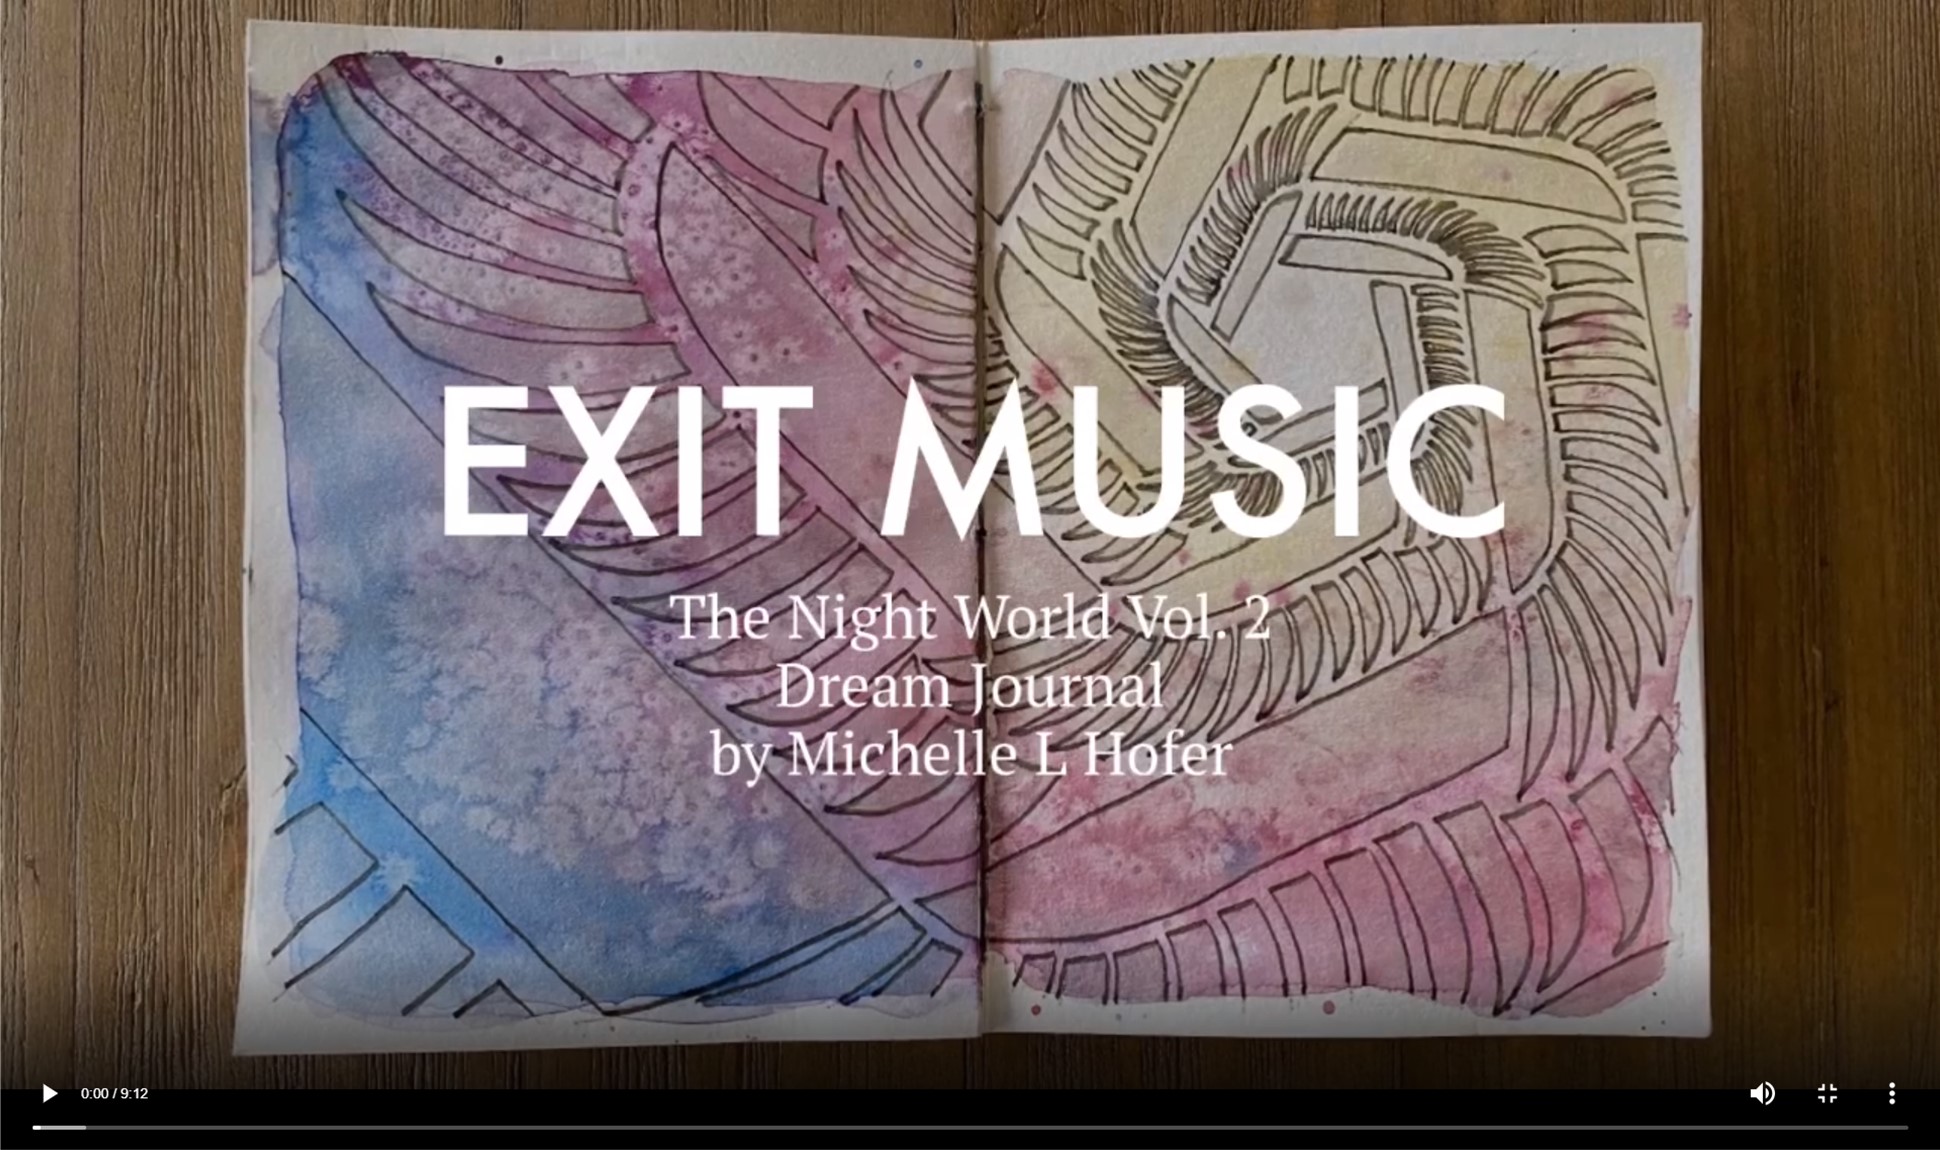 Exit Music Video Link - The Night World Vol. 2 Dream Journal by Michelle L Hofer